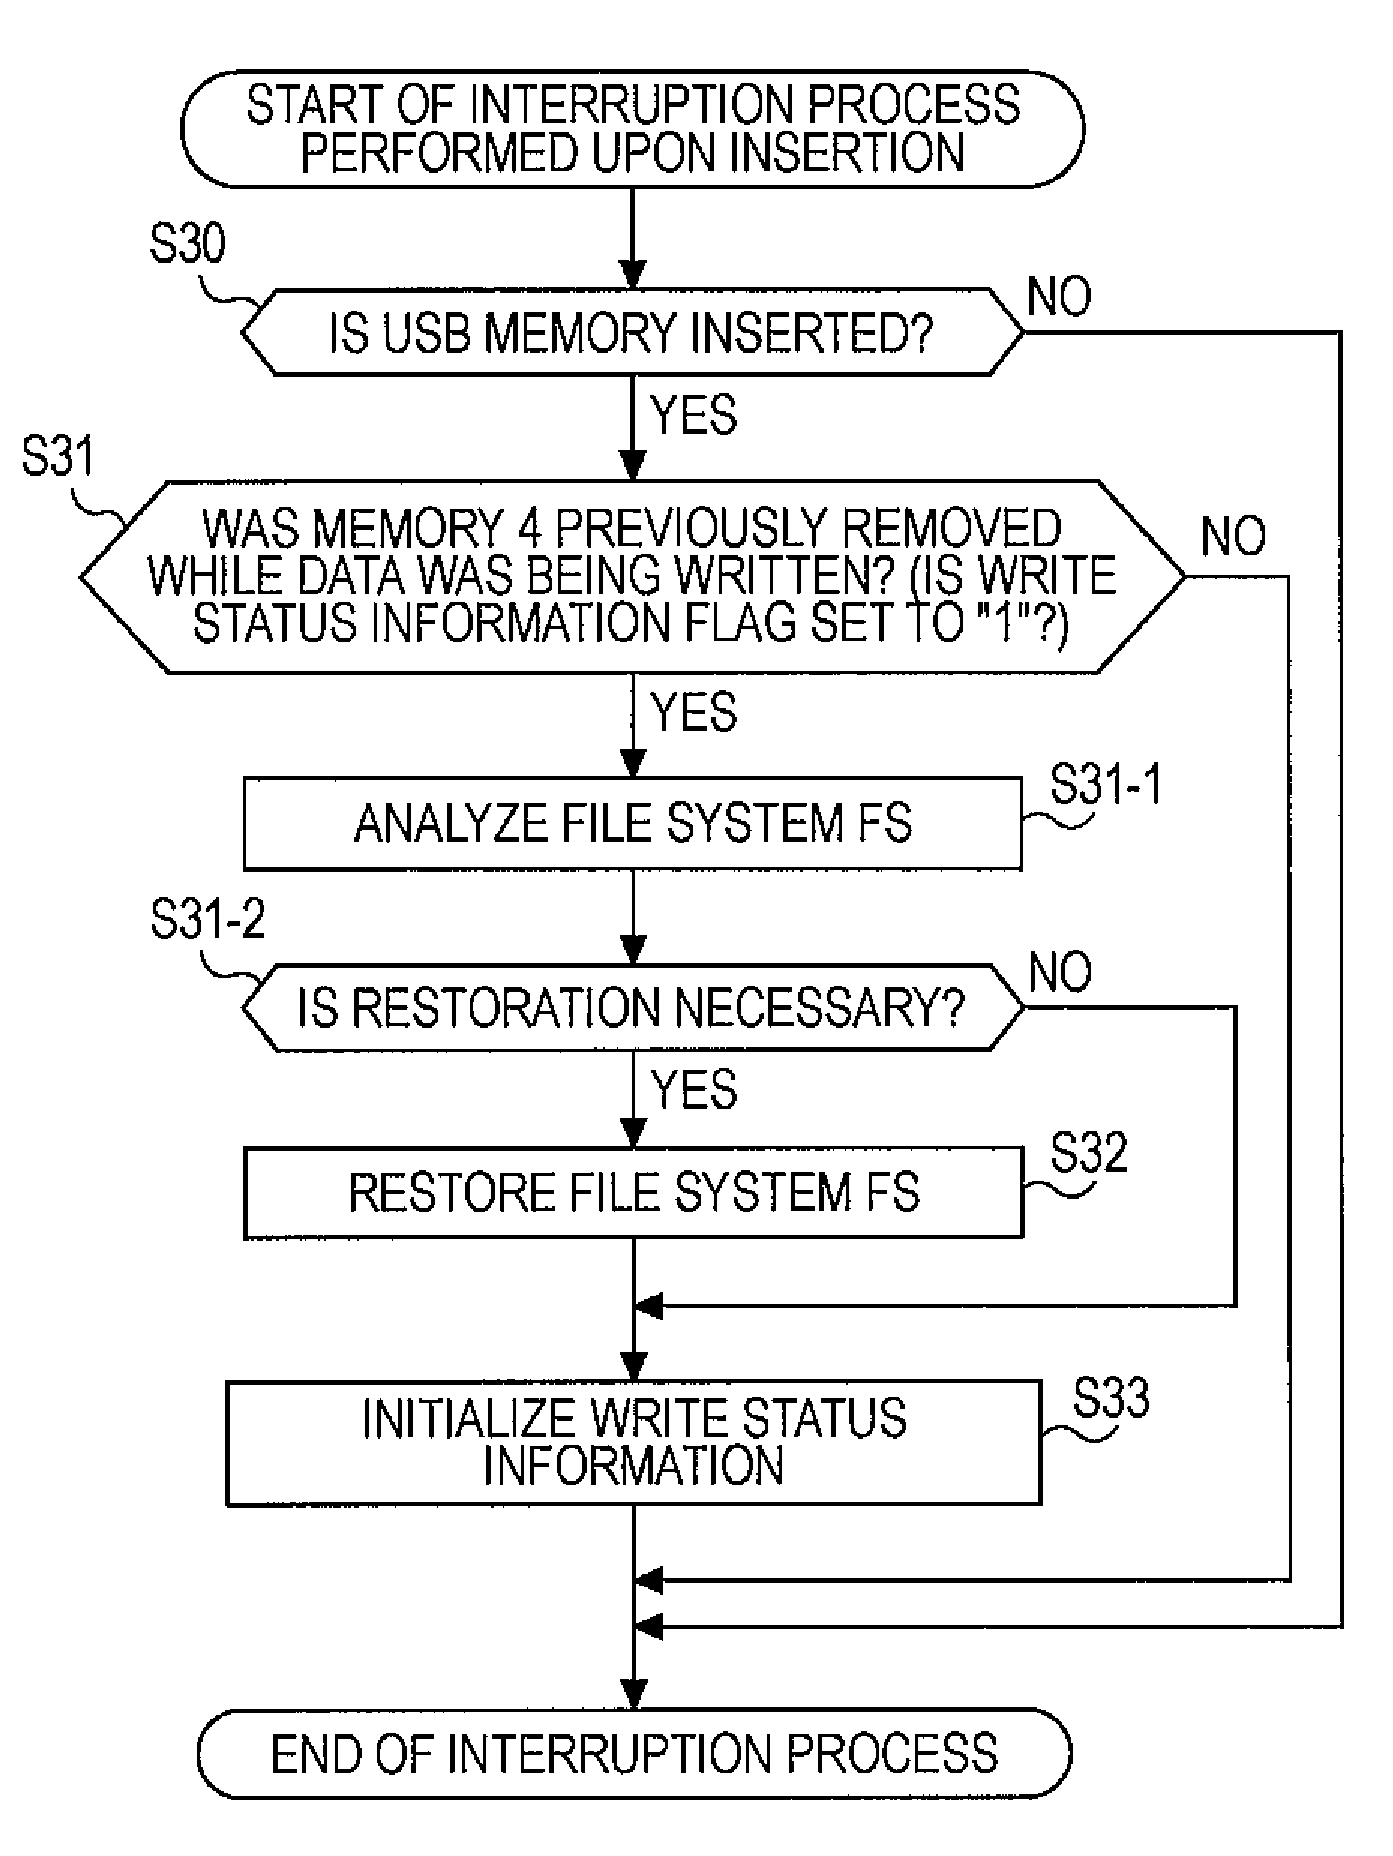 Data processing apparatus and method for restoring a file system